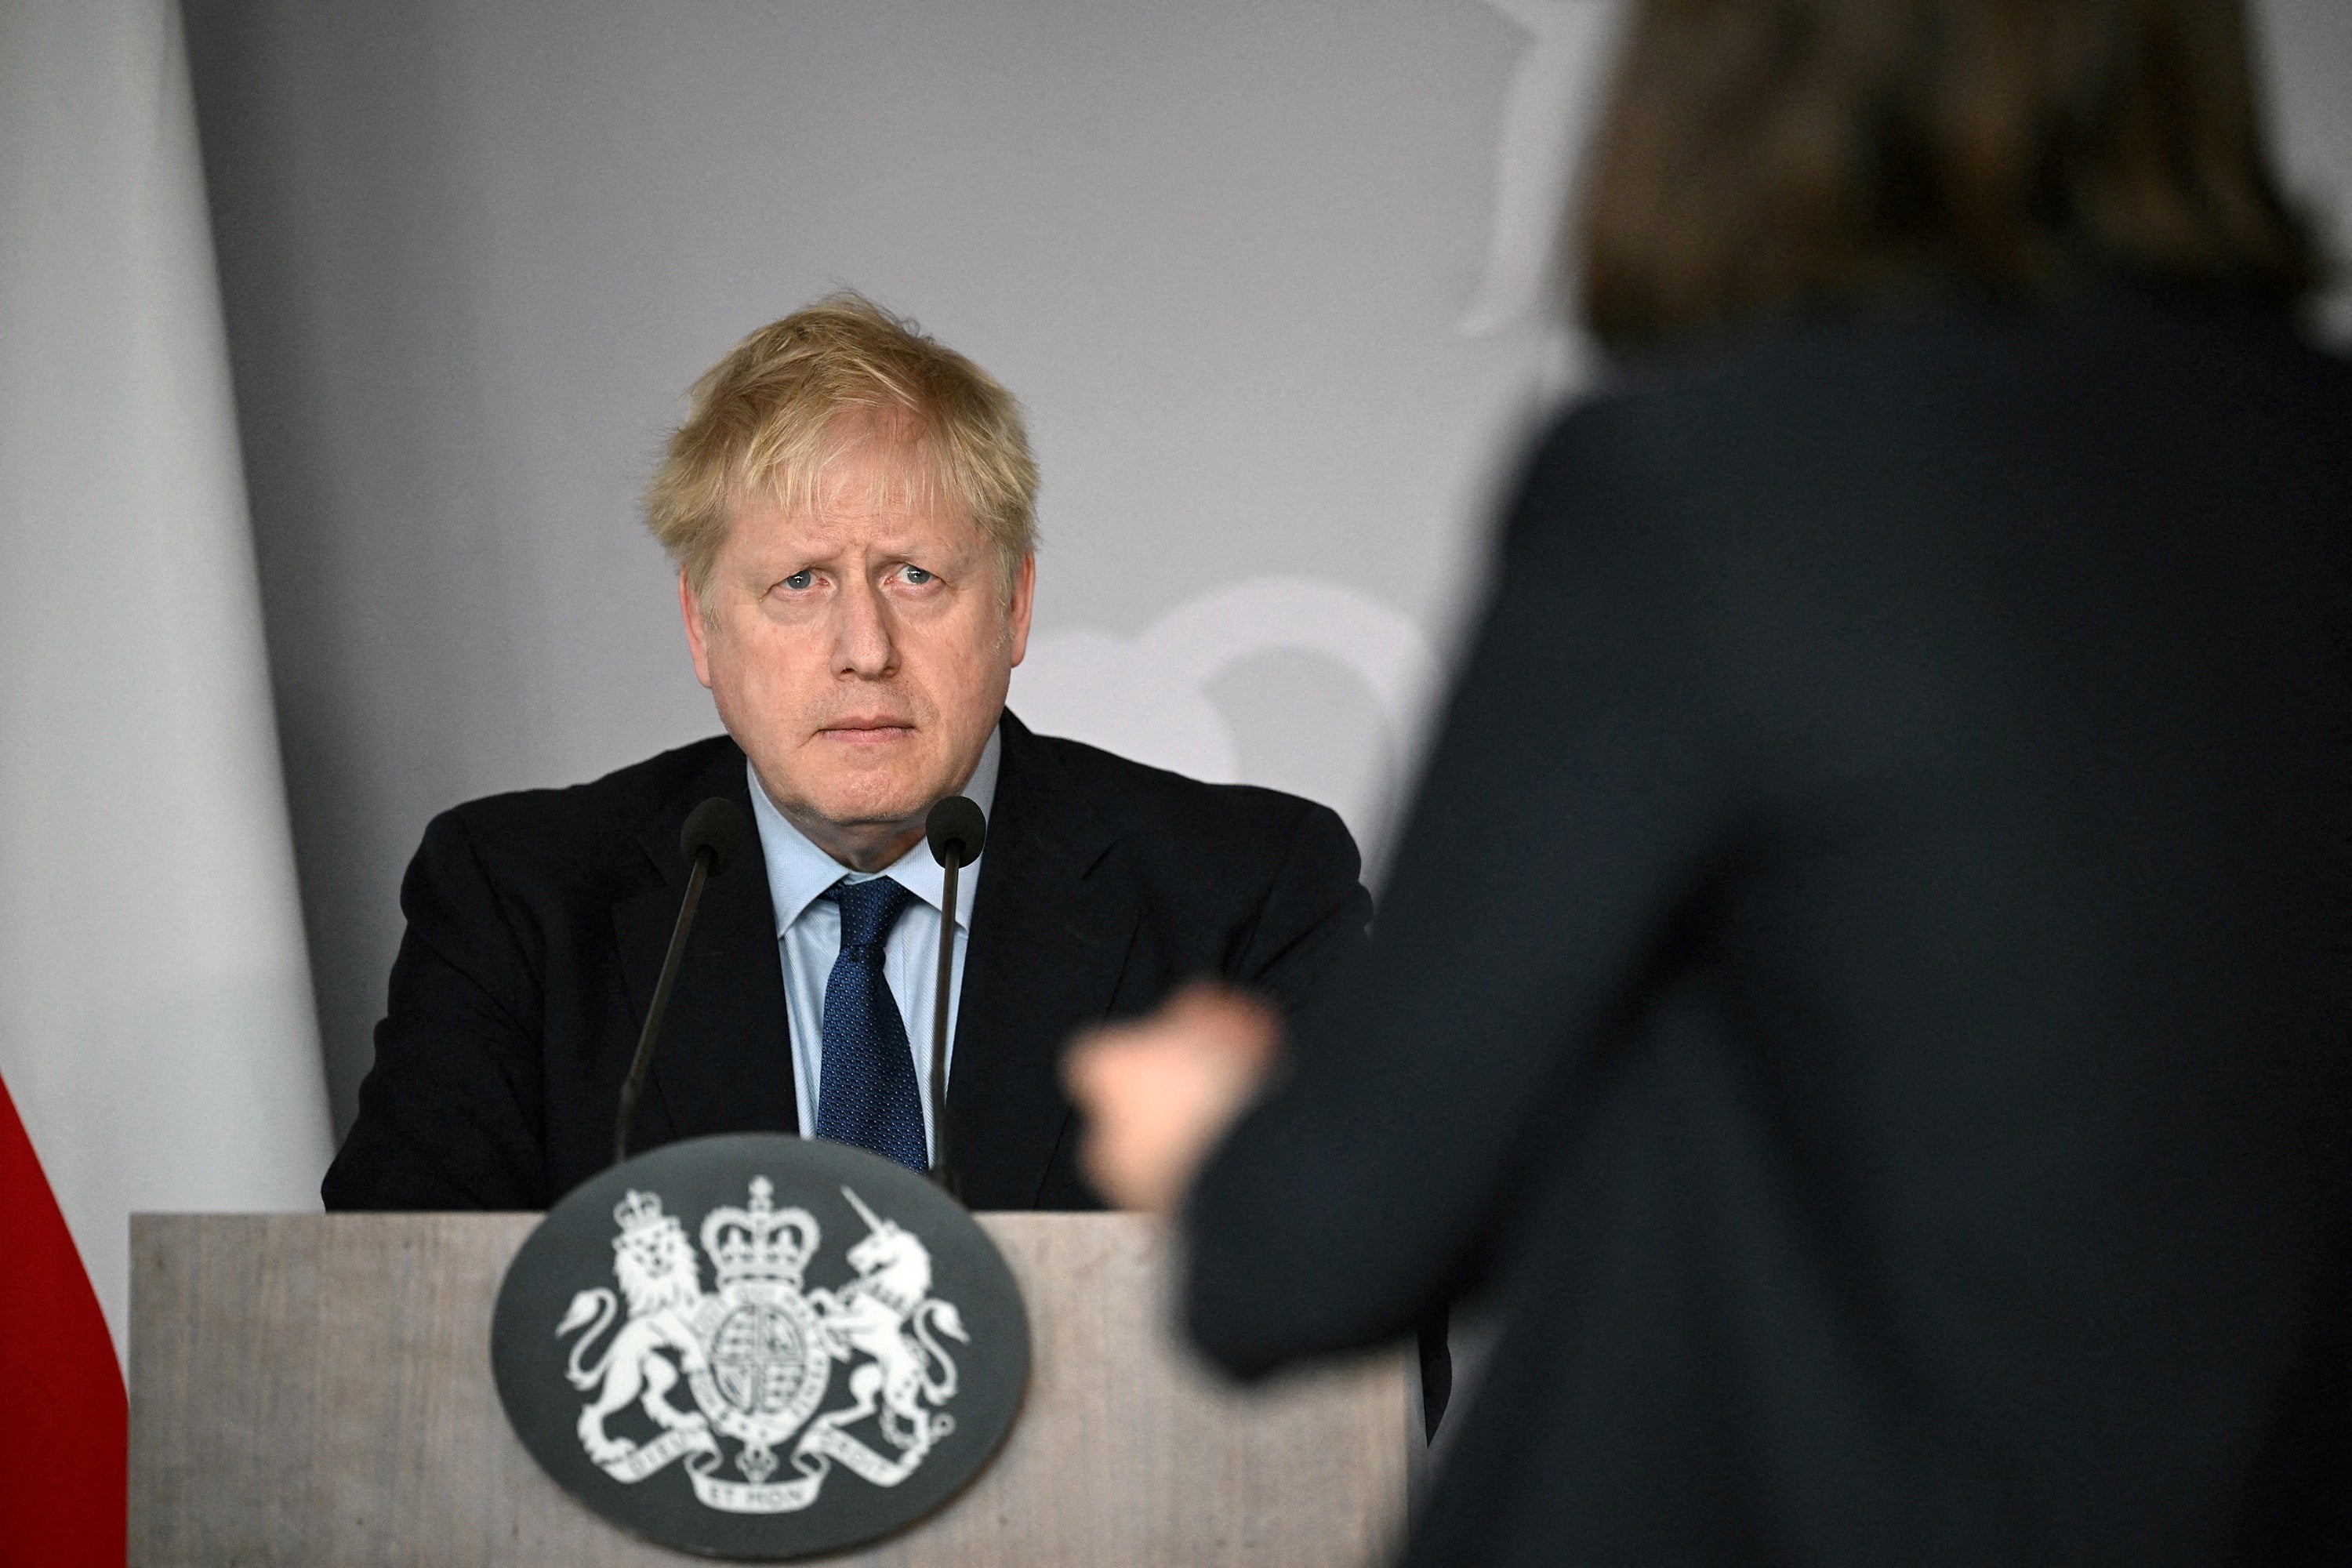 Boris Johnson fields a question from Ukrainian activist Daria Kaleniuk about the need for a no-fly zone during a news conference at the British embassy in Warsaw on Tuesday